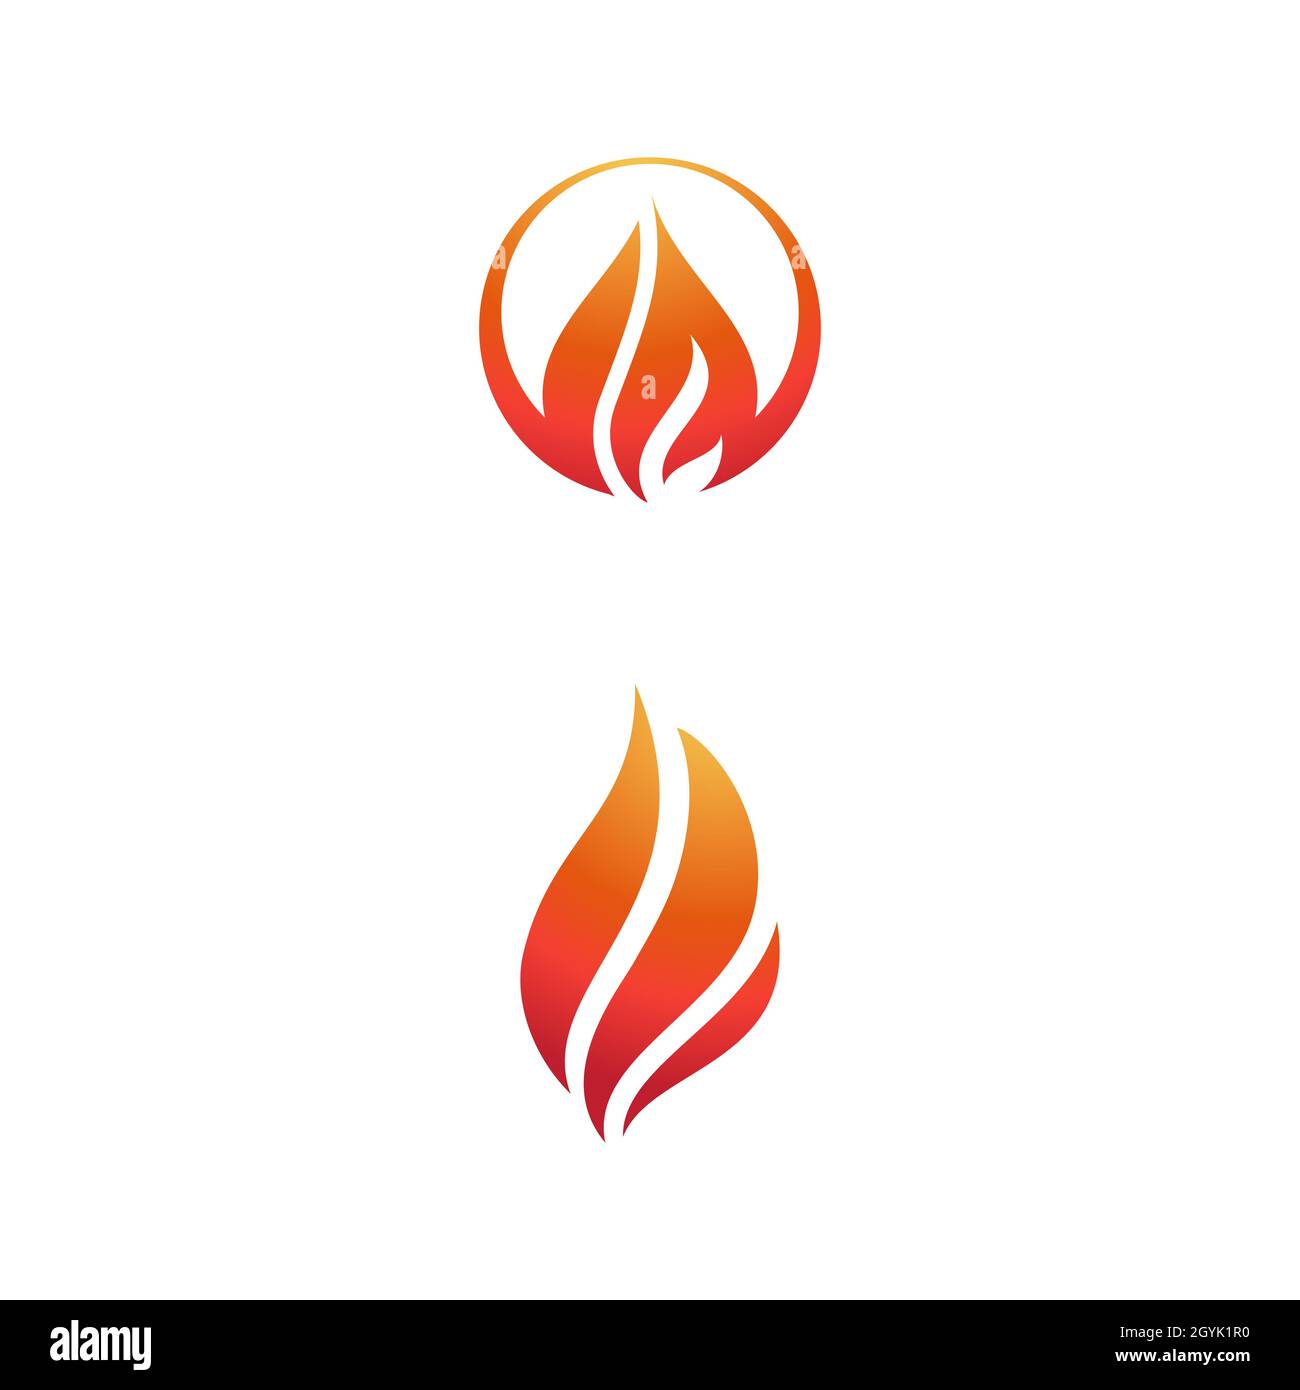 Hot flame fire vector icon illustration design template Stock Photo